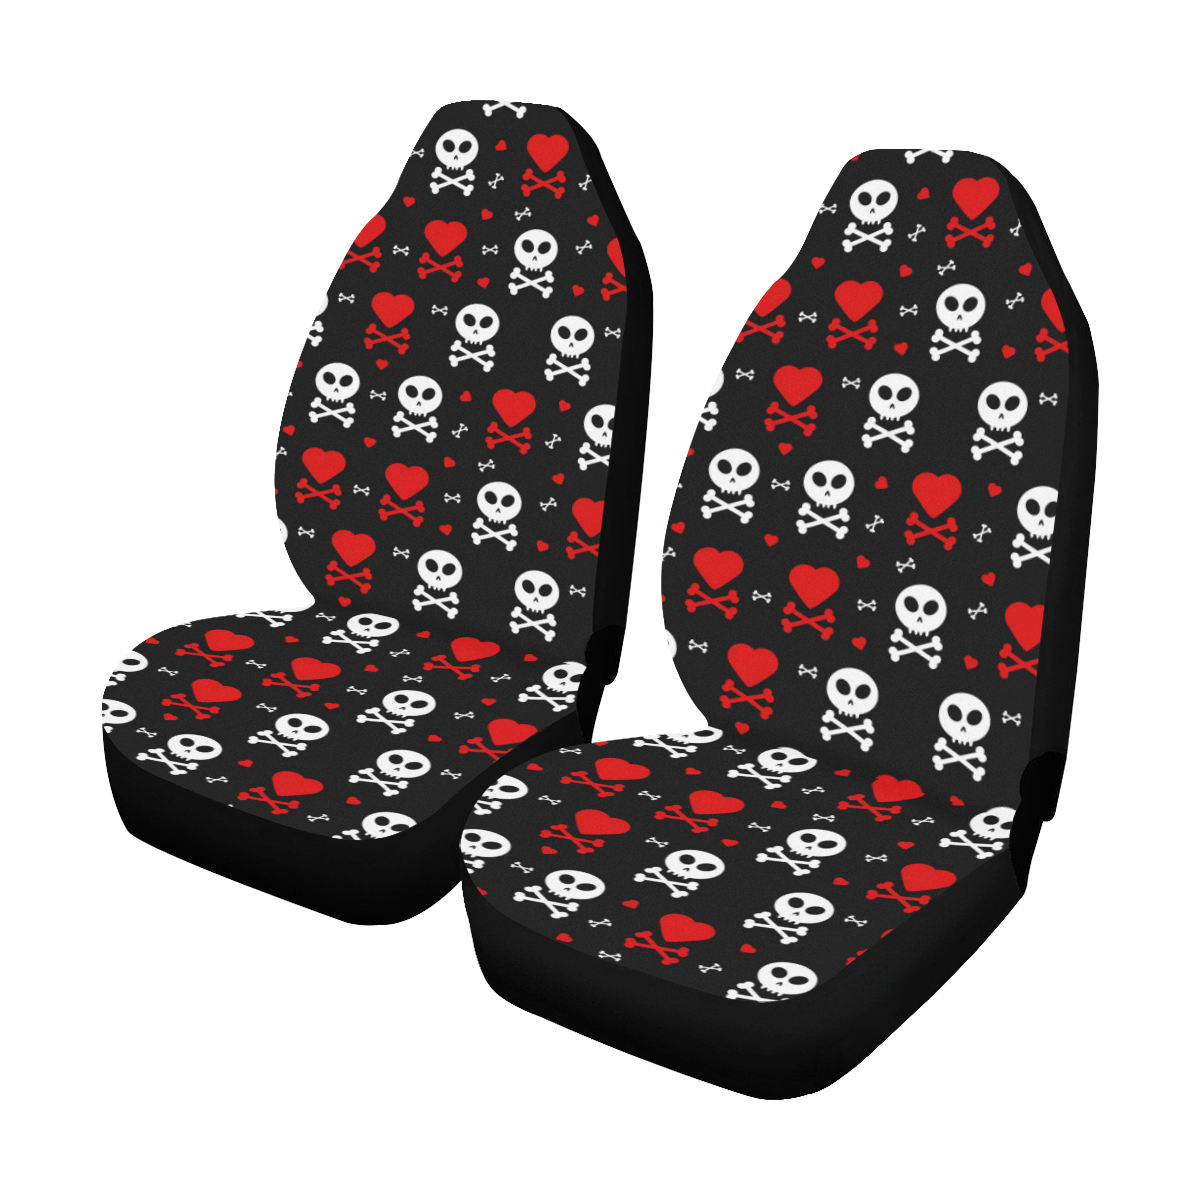 Skull and Crossbones Car Seat Covers (Set of 2)